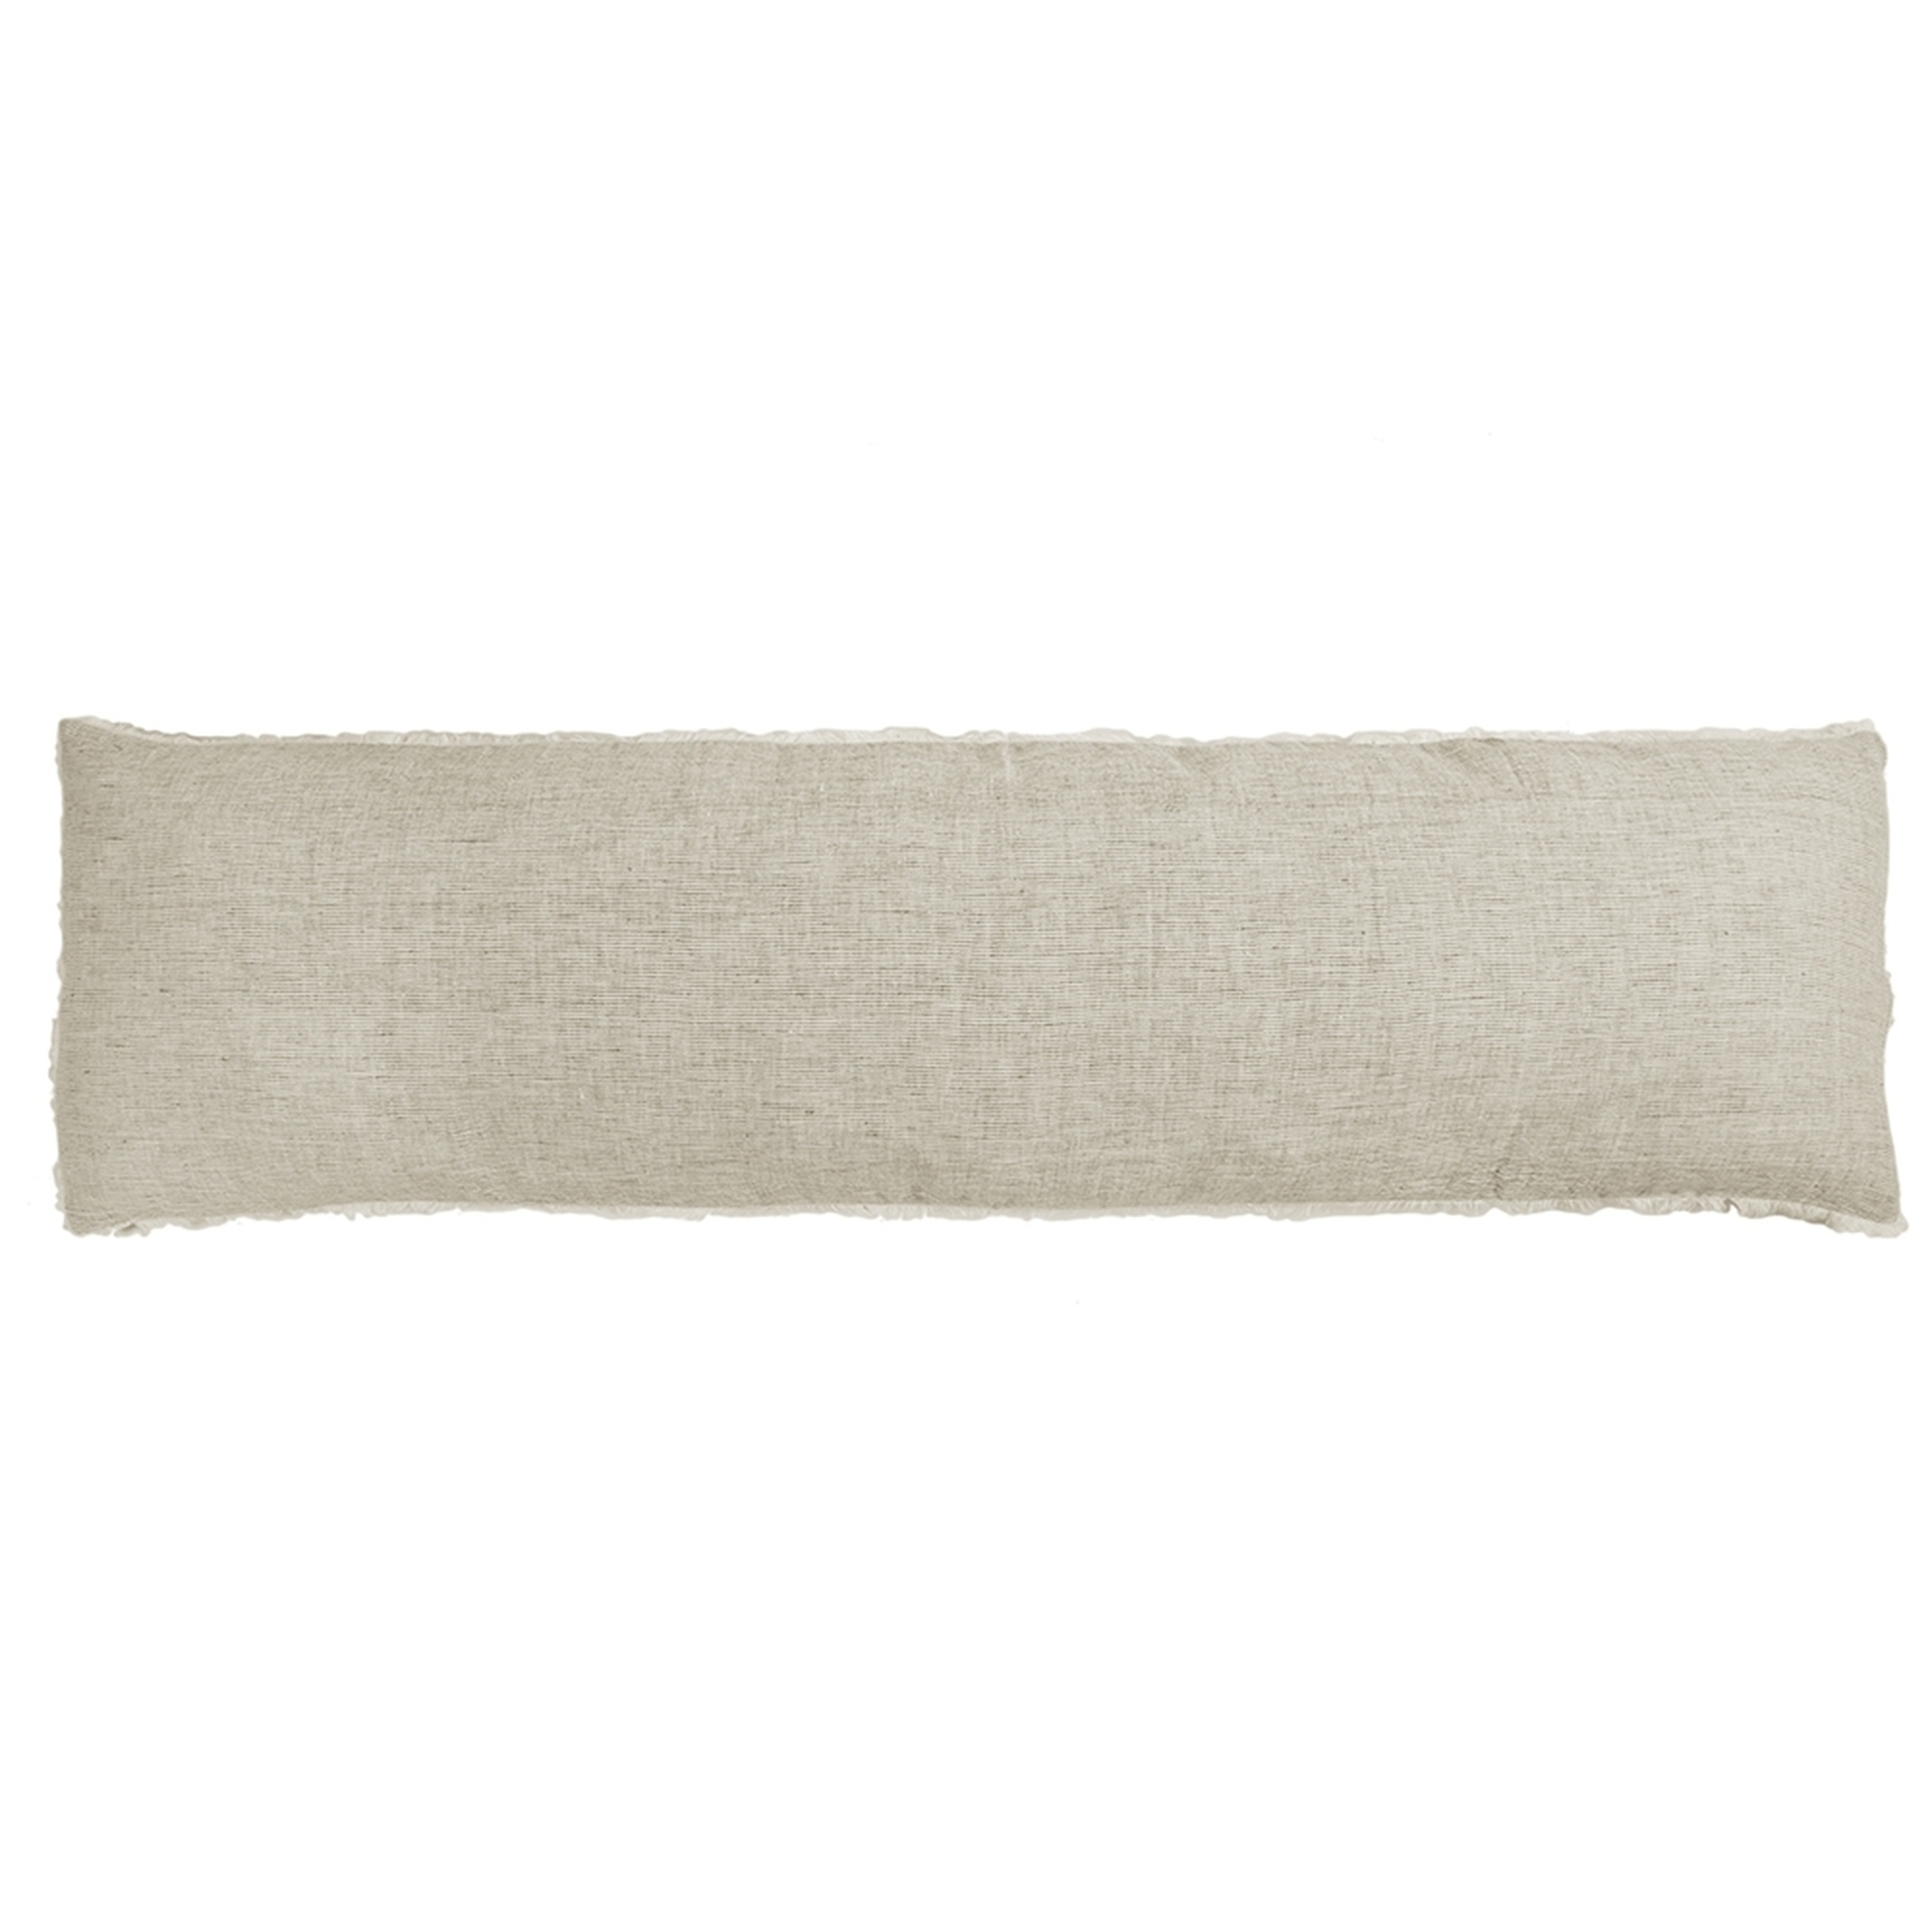 Logan Linen Pillow by Pom Pom at Home - Lulu and Georgia